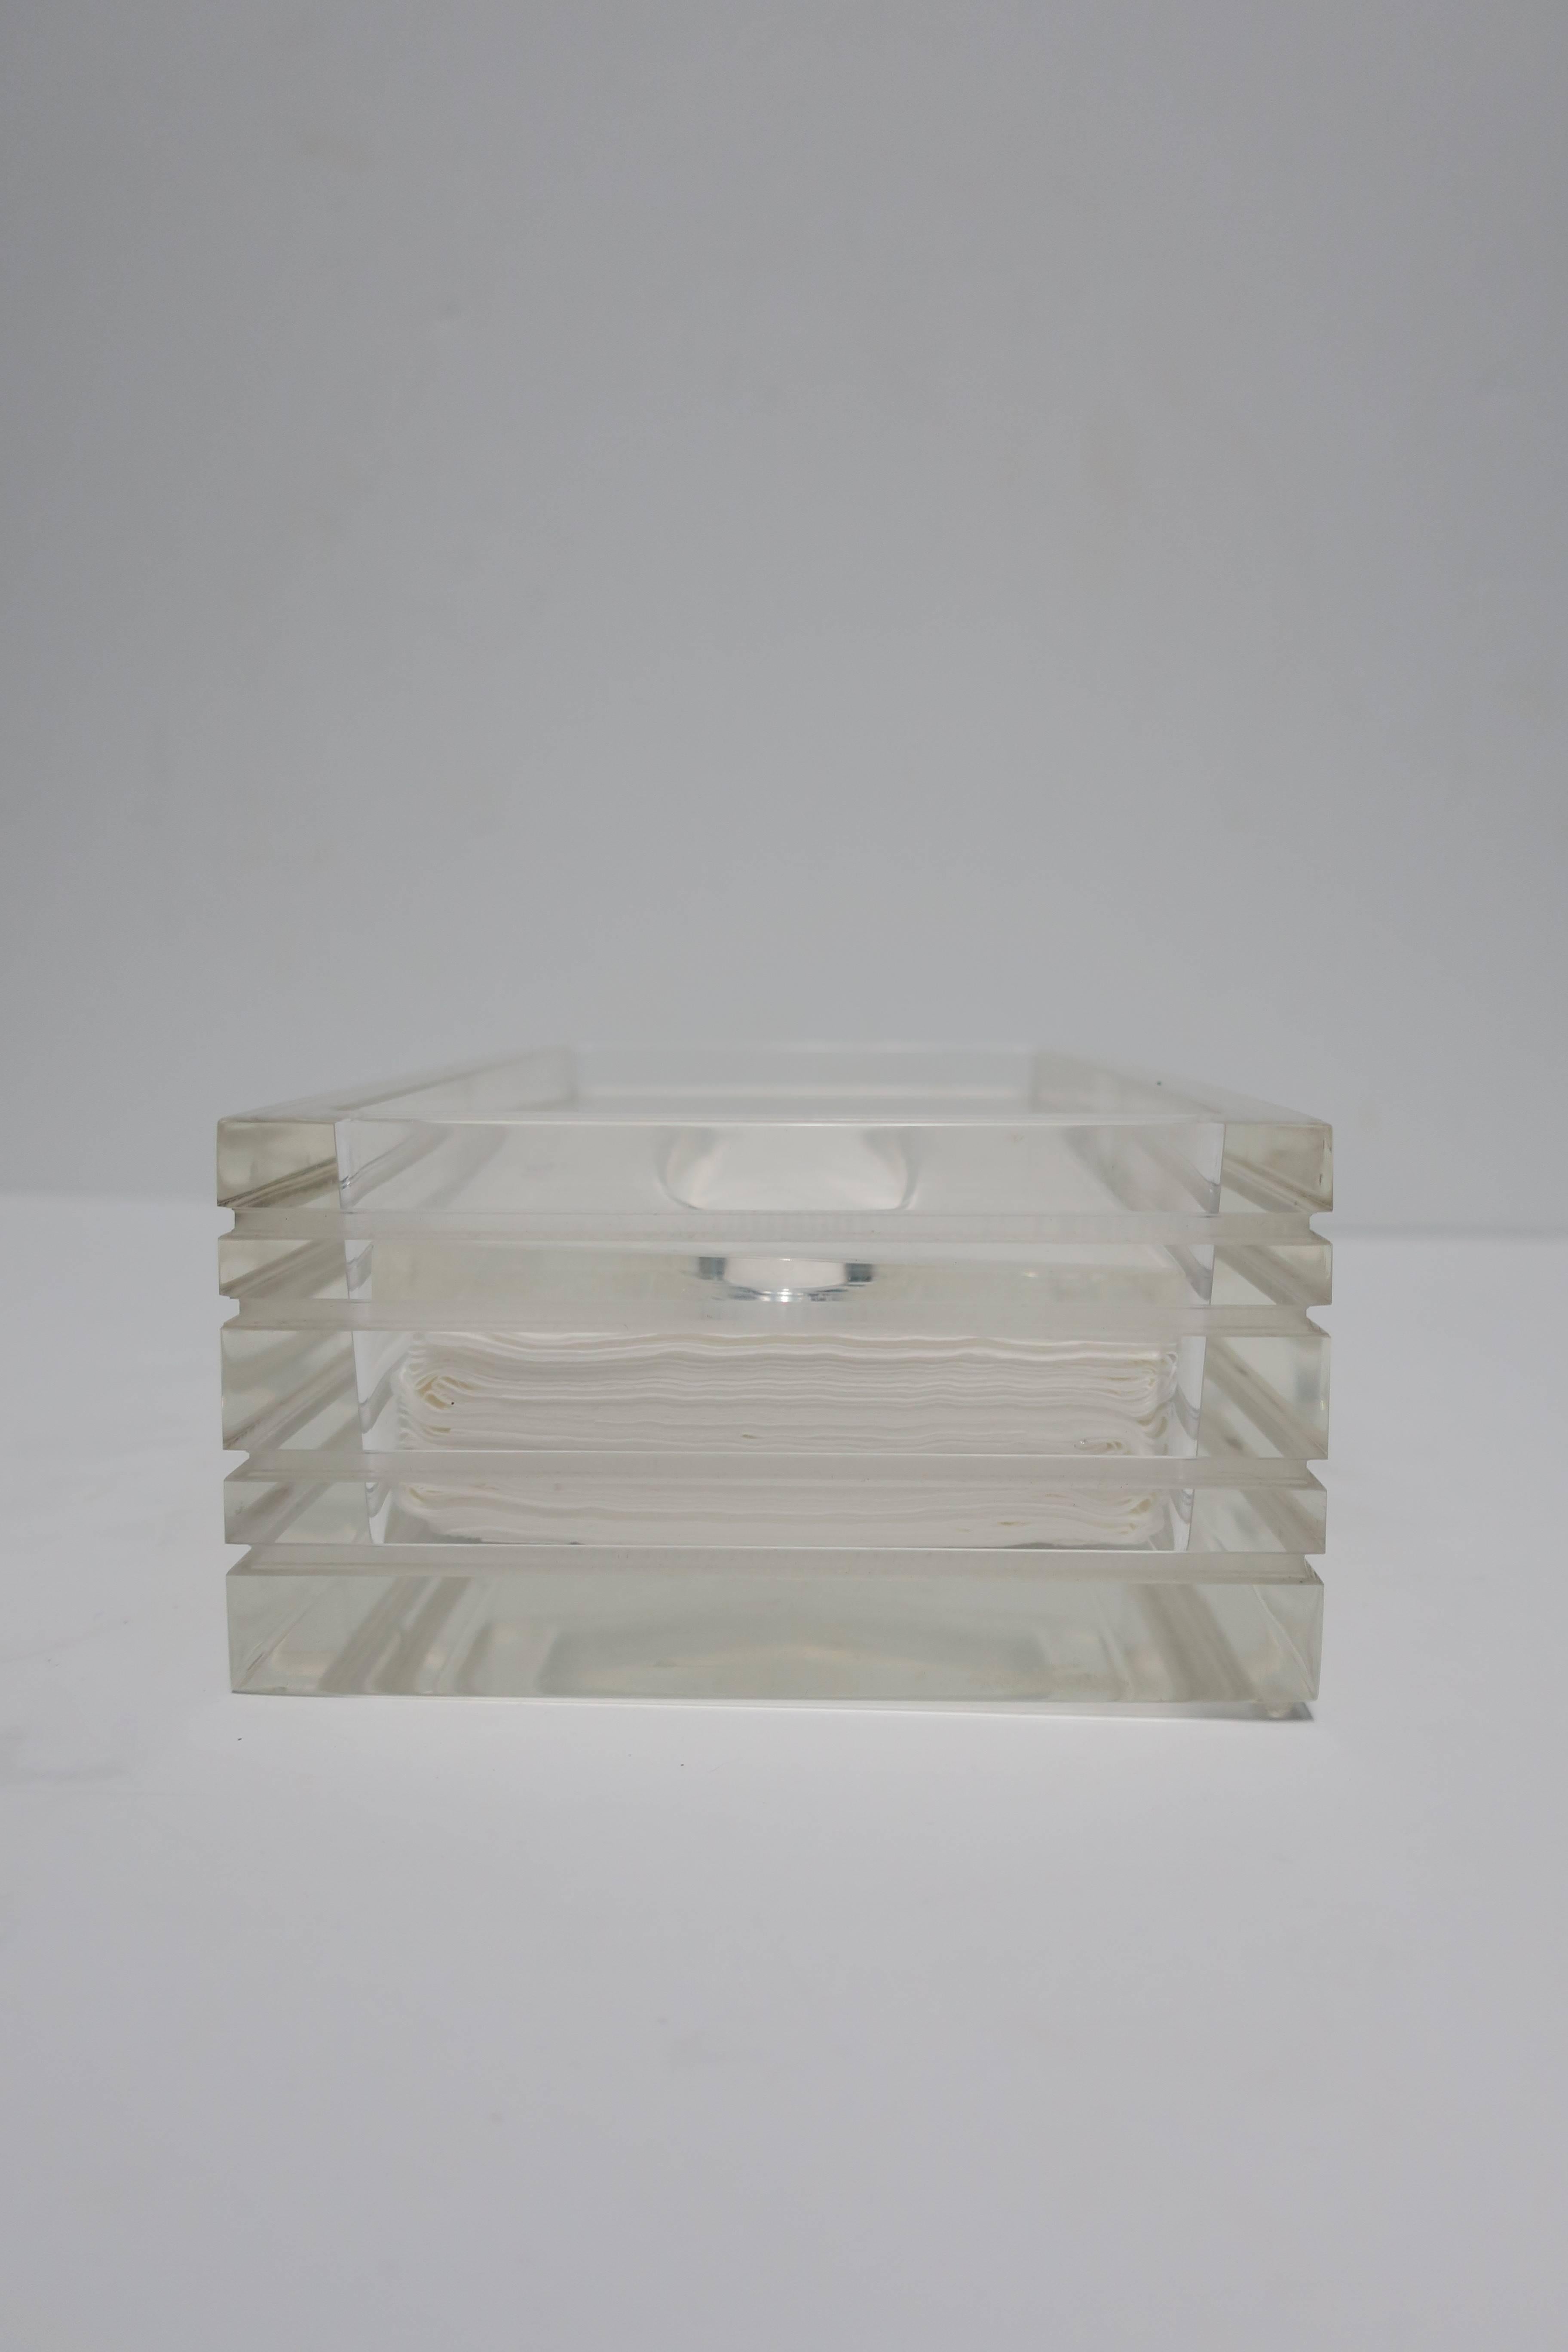 Late 20th Century Modern Lucite Tissue Box in the Style of Charles Hollis Jones, ca. 1970s